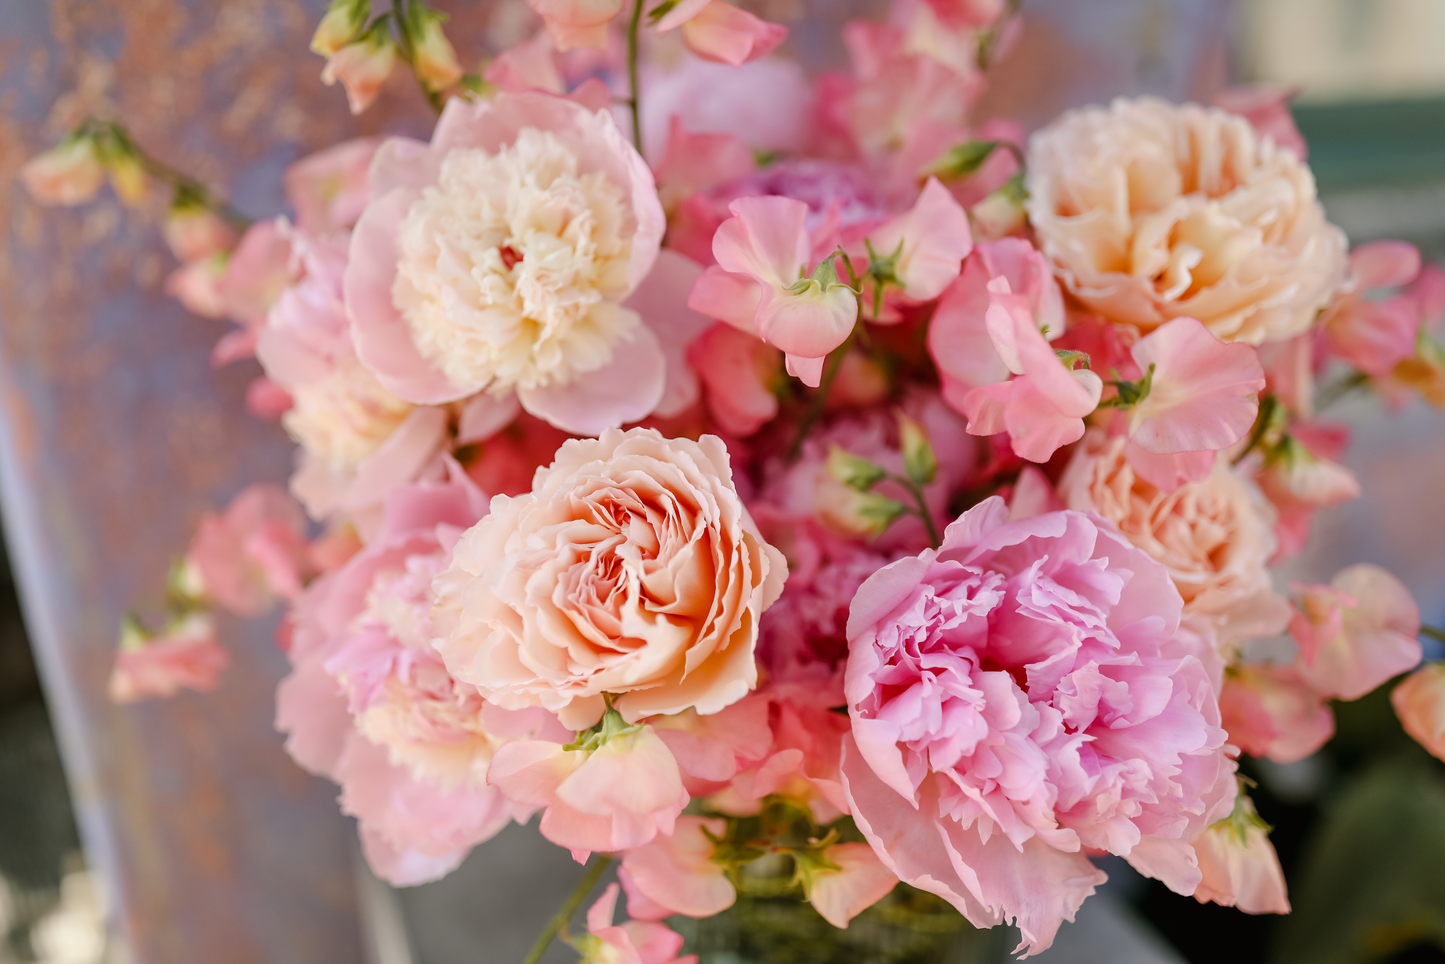 Close up of a flower arrangement to celebrate Mother's Day, Peaches and Pinks - featuring Peonies, Sweet Peas, and Garden Roses from Rose Story Farm  (Large size pictured)